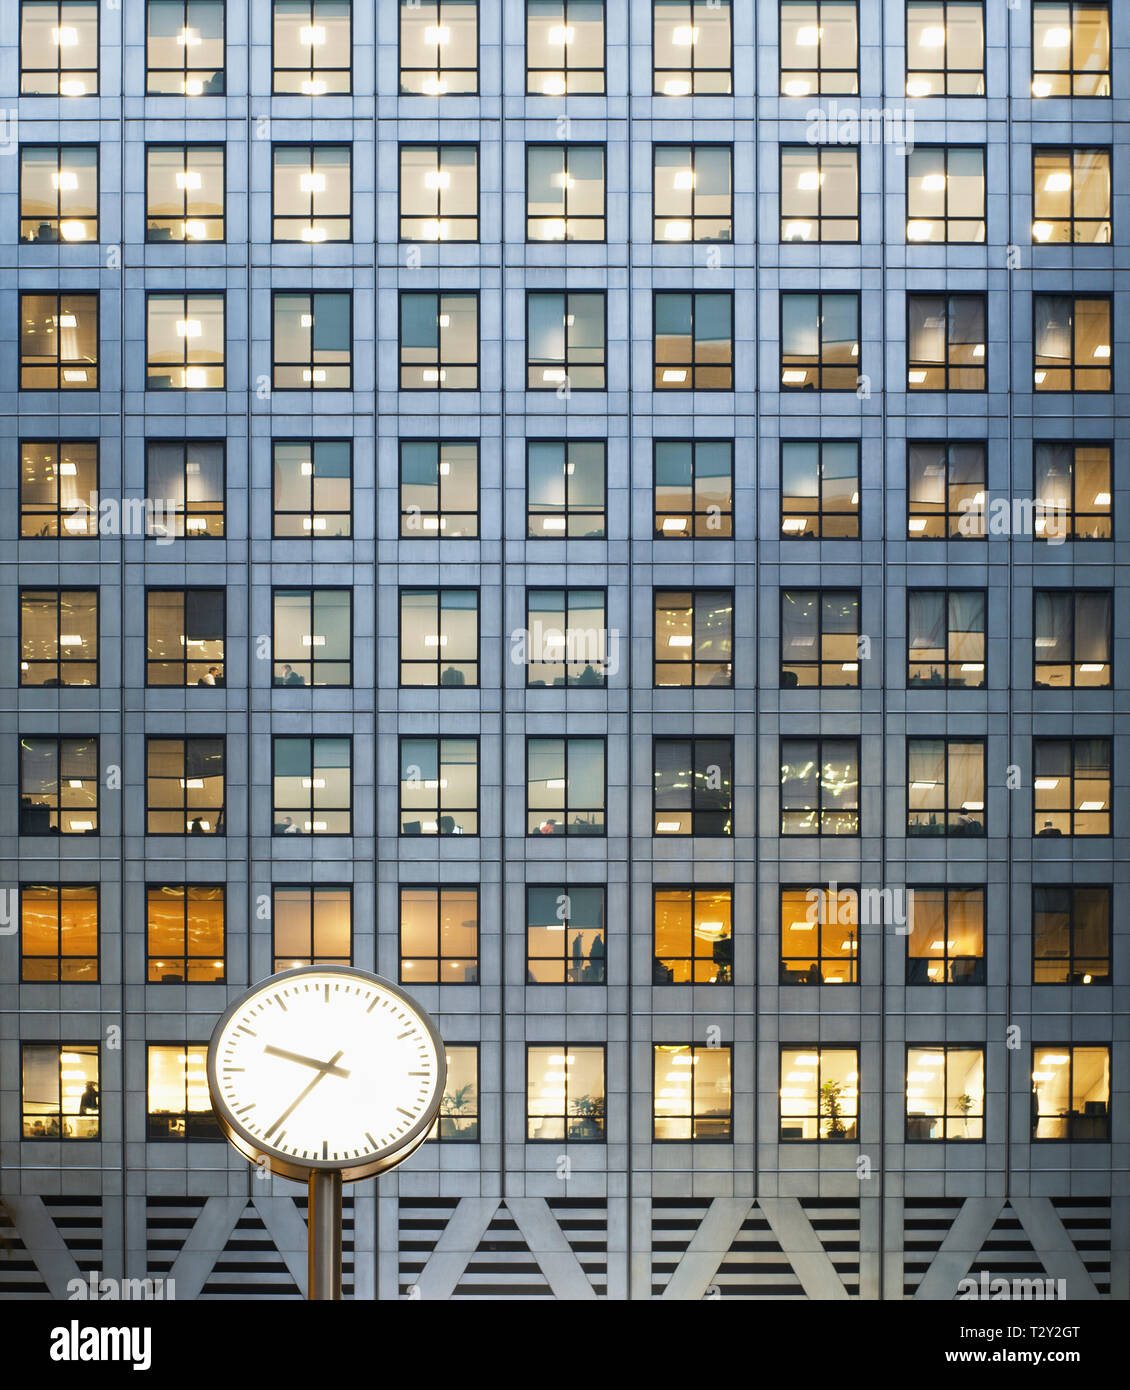 Clock and office windows at dusk Stock Photo